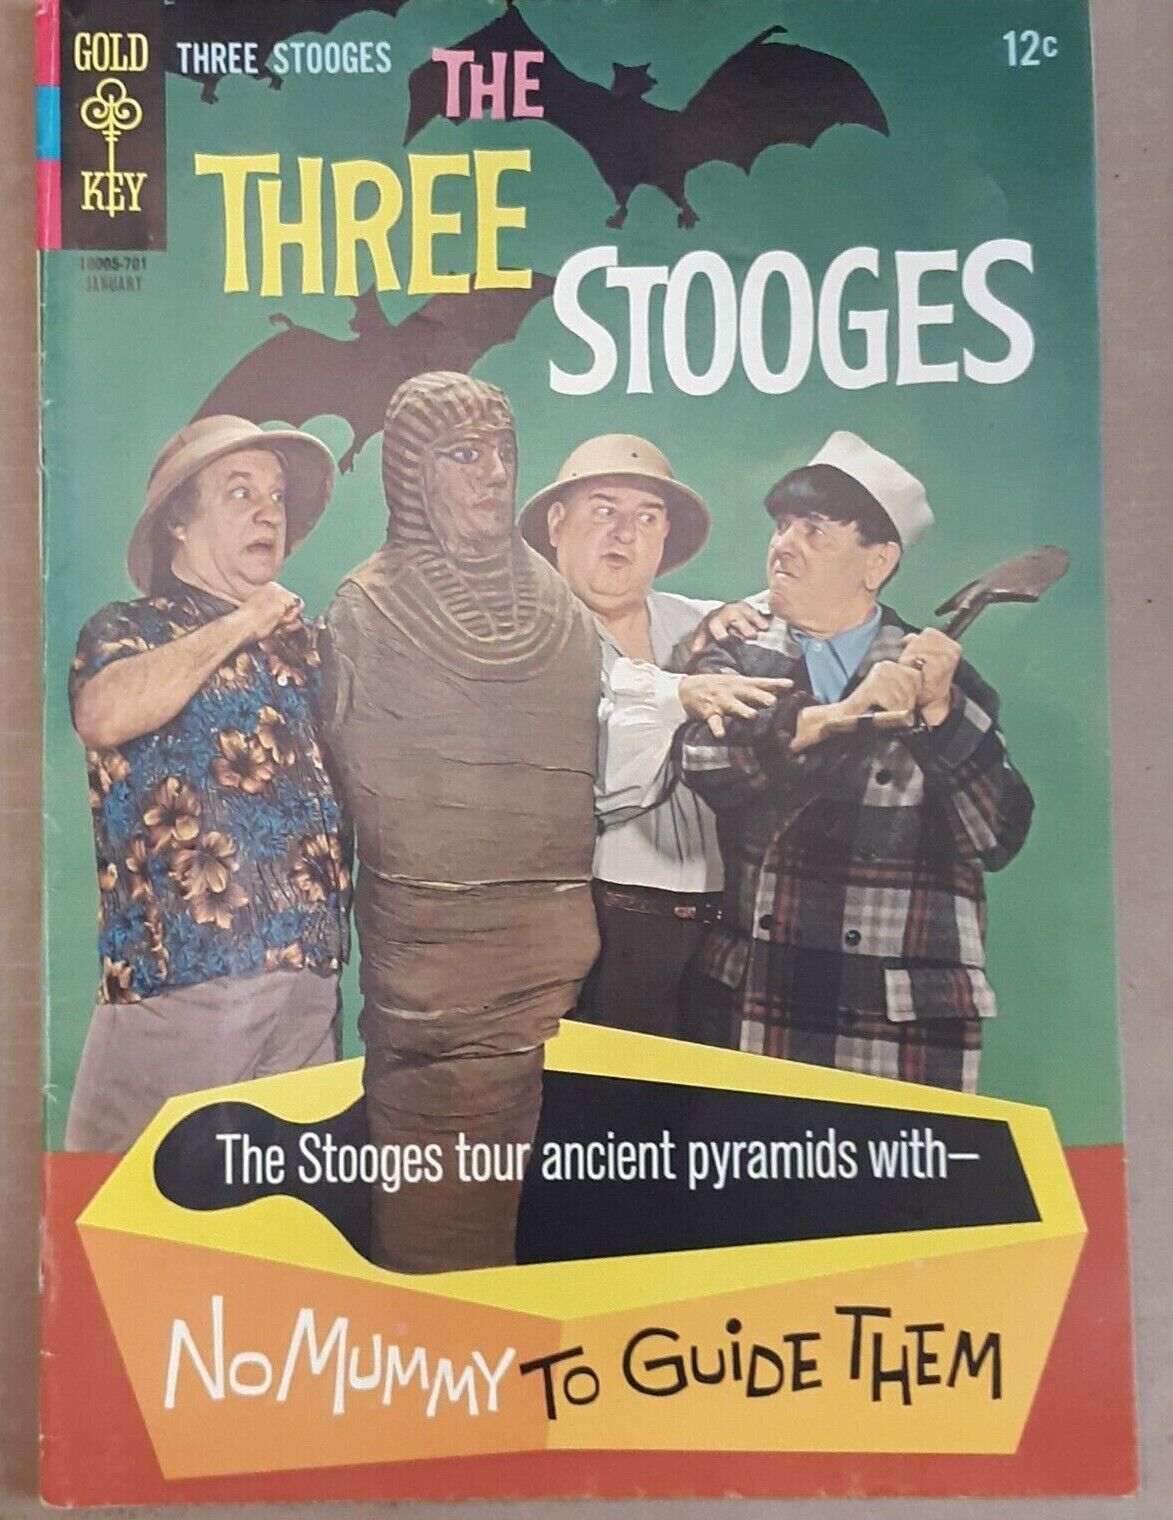 JANUARY 1967 12 CENT GOLD KEY COMIC THE THREE STOOGES #32 TV SERIES PHOTO FRONT